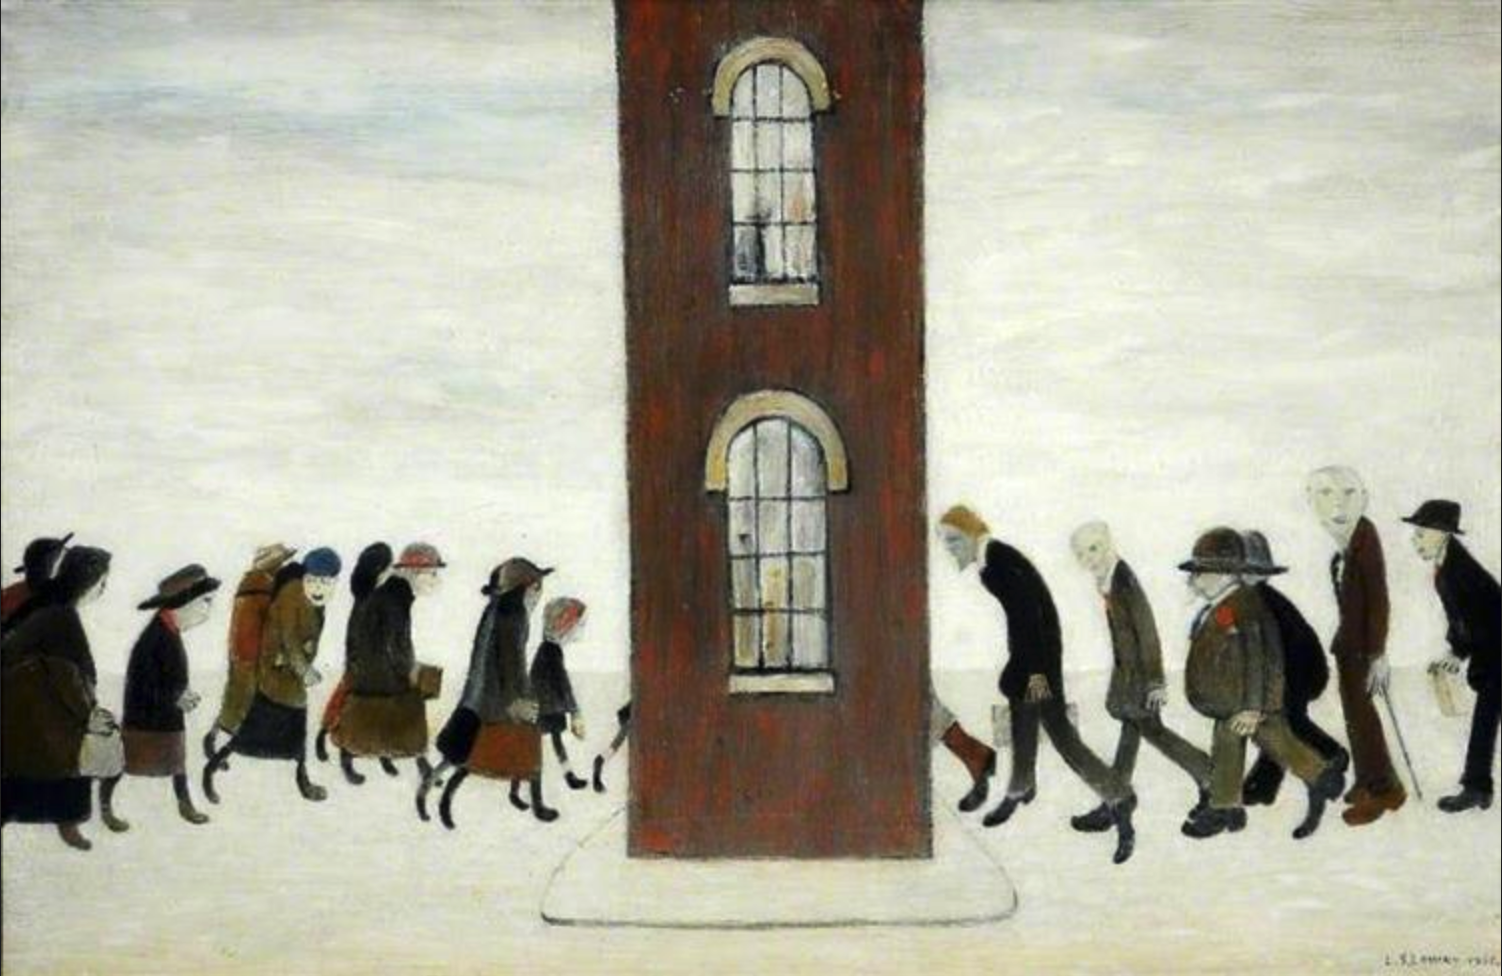 Meeting Point (1965) by Laurence Stephen Lowry (1887 - 1976), English artist.